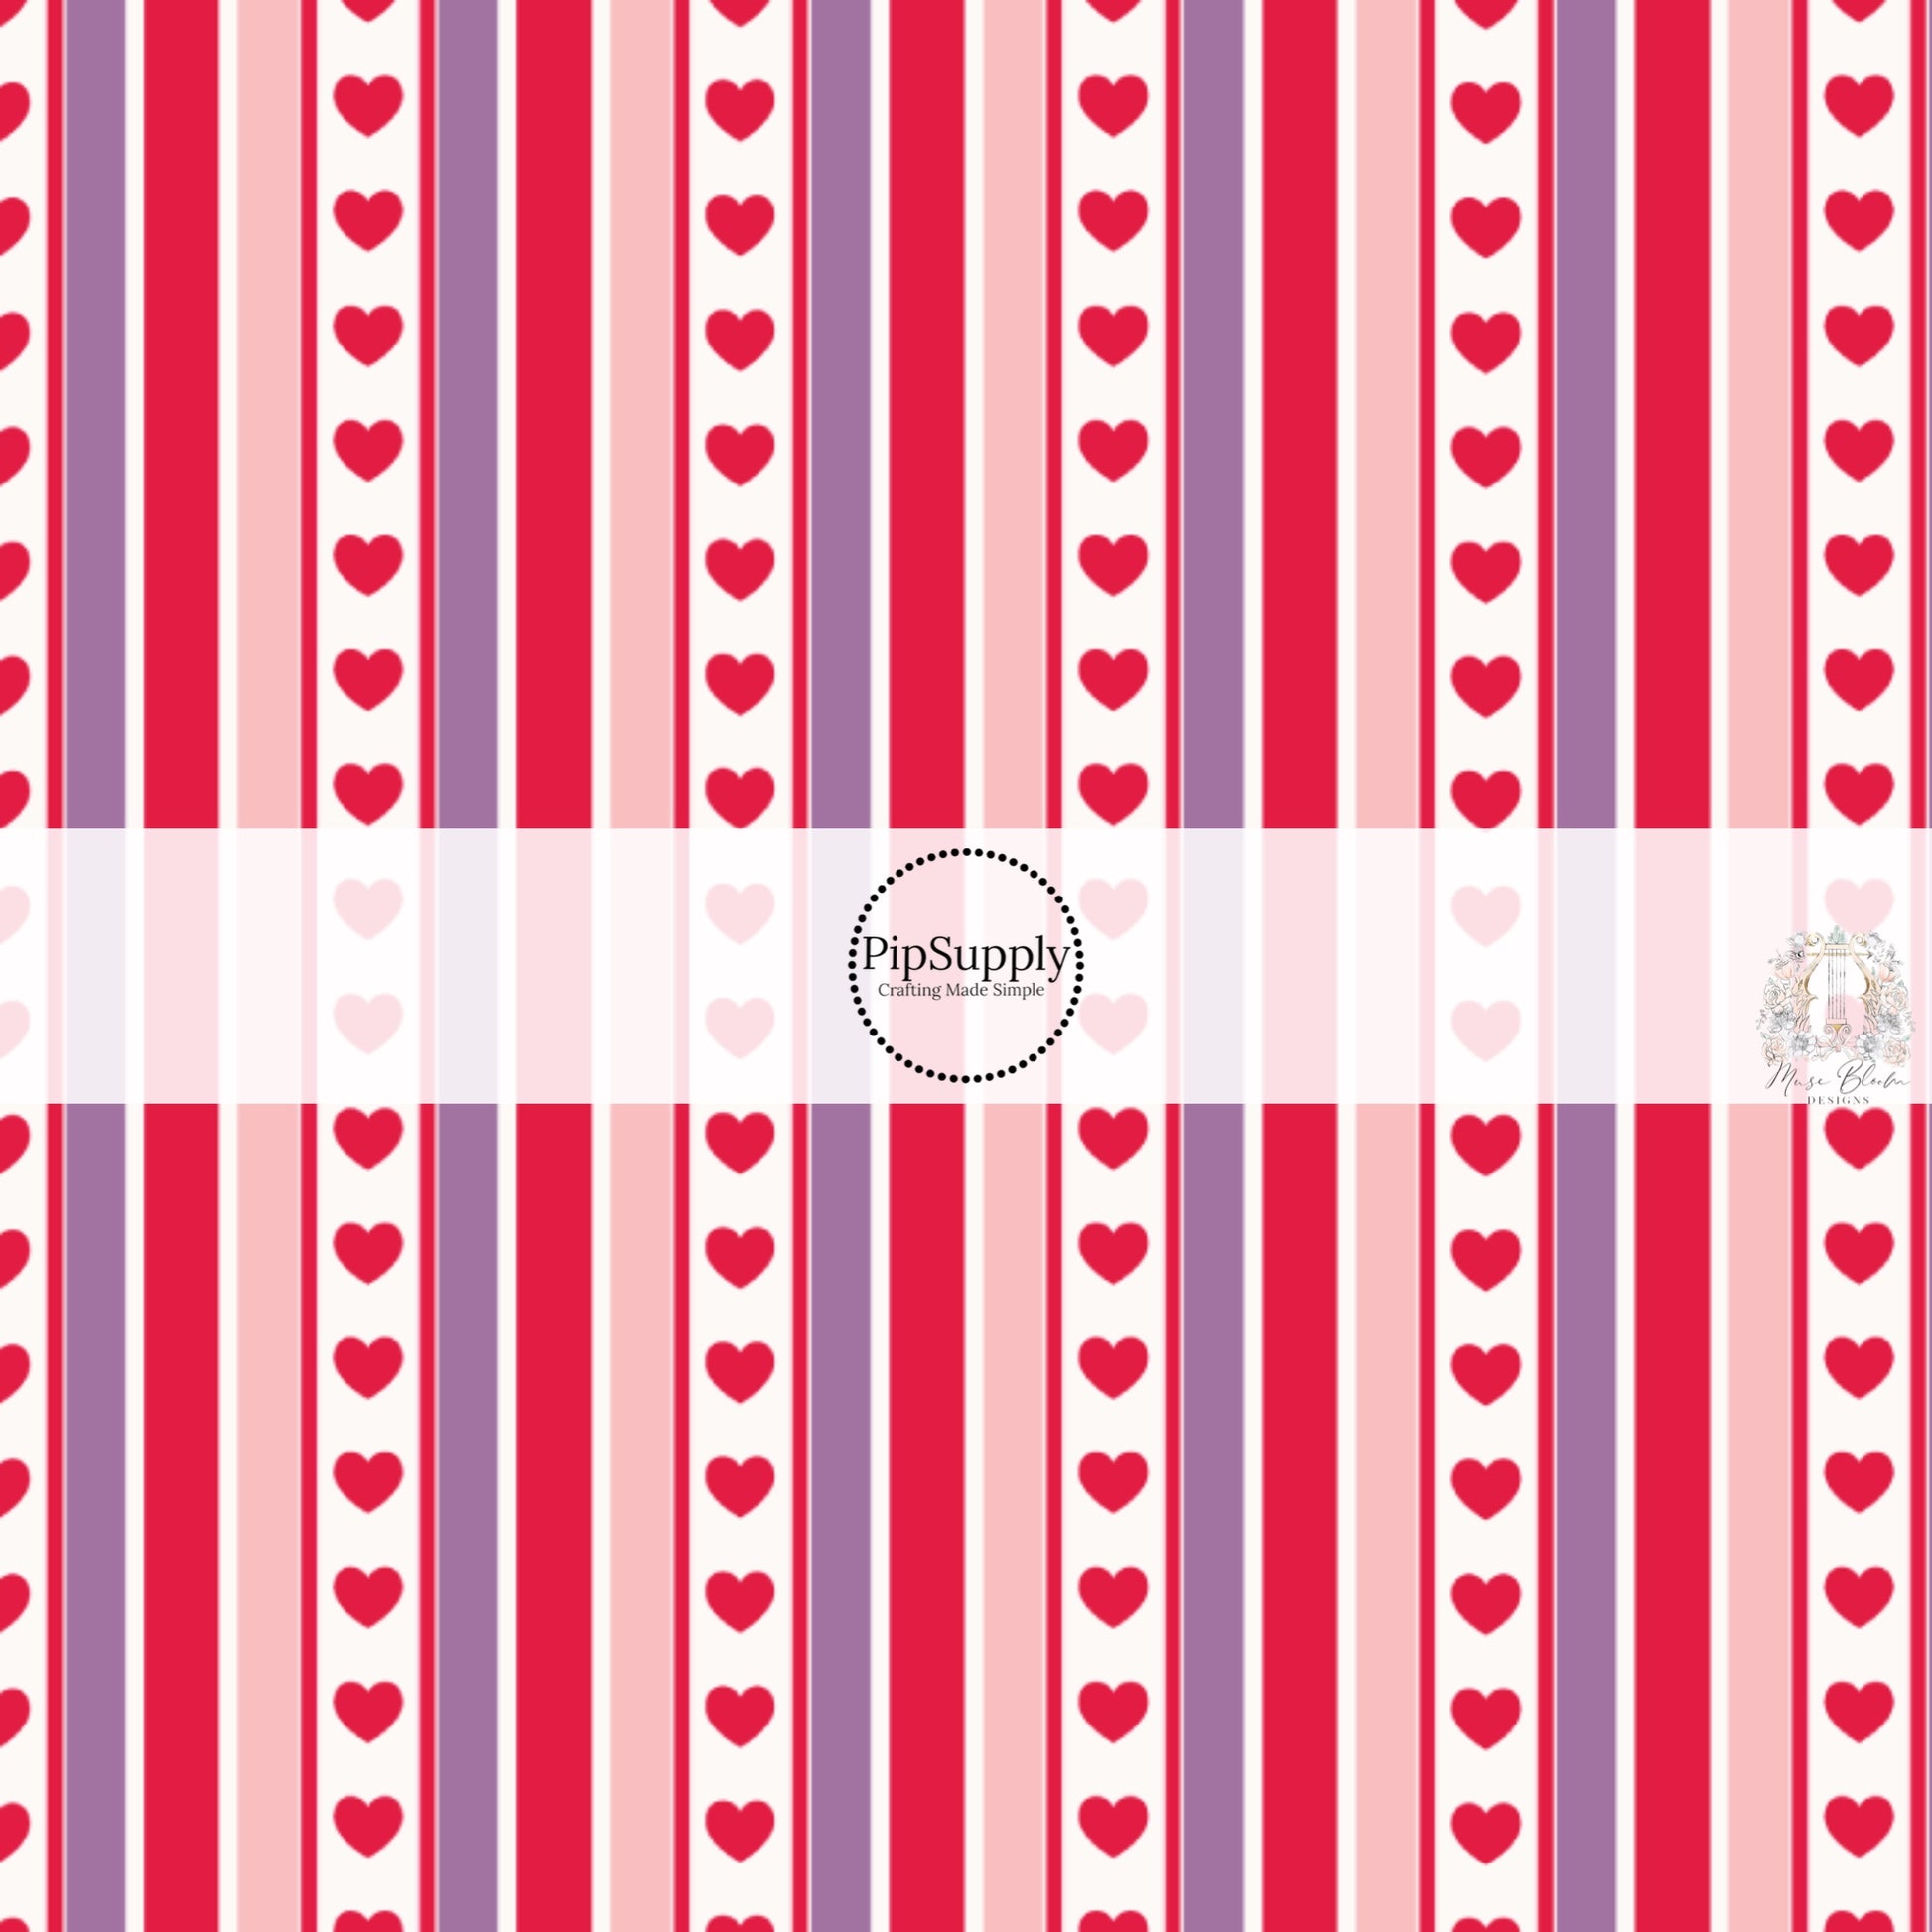 Purple, Pink, and Red Hearts Striped Fabric by the Yard.